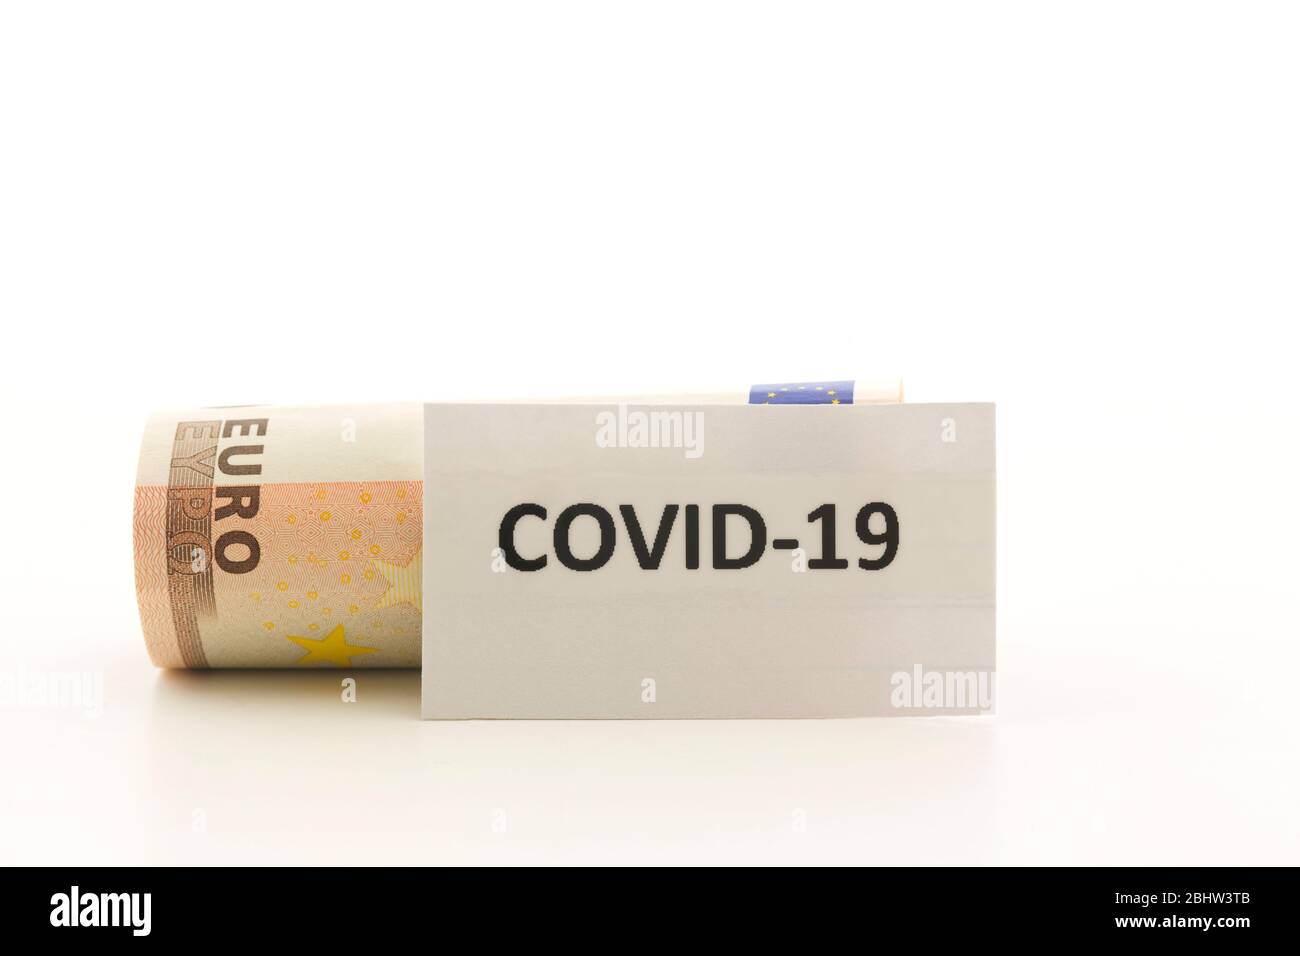 Covid-19 lettered on card placed in front of fallen Euro currency reflects economic impact of coronavirus crisis Stock Photo